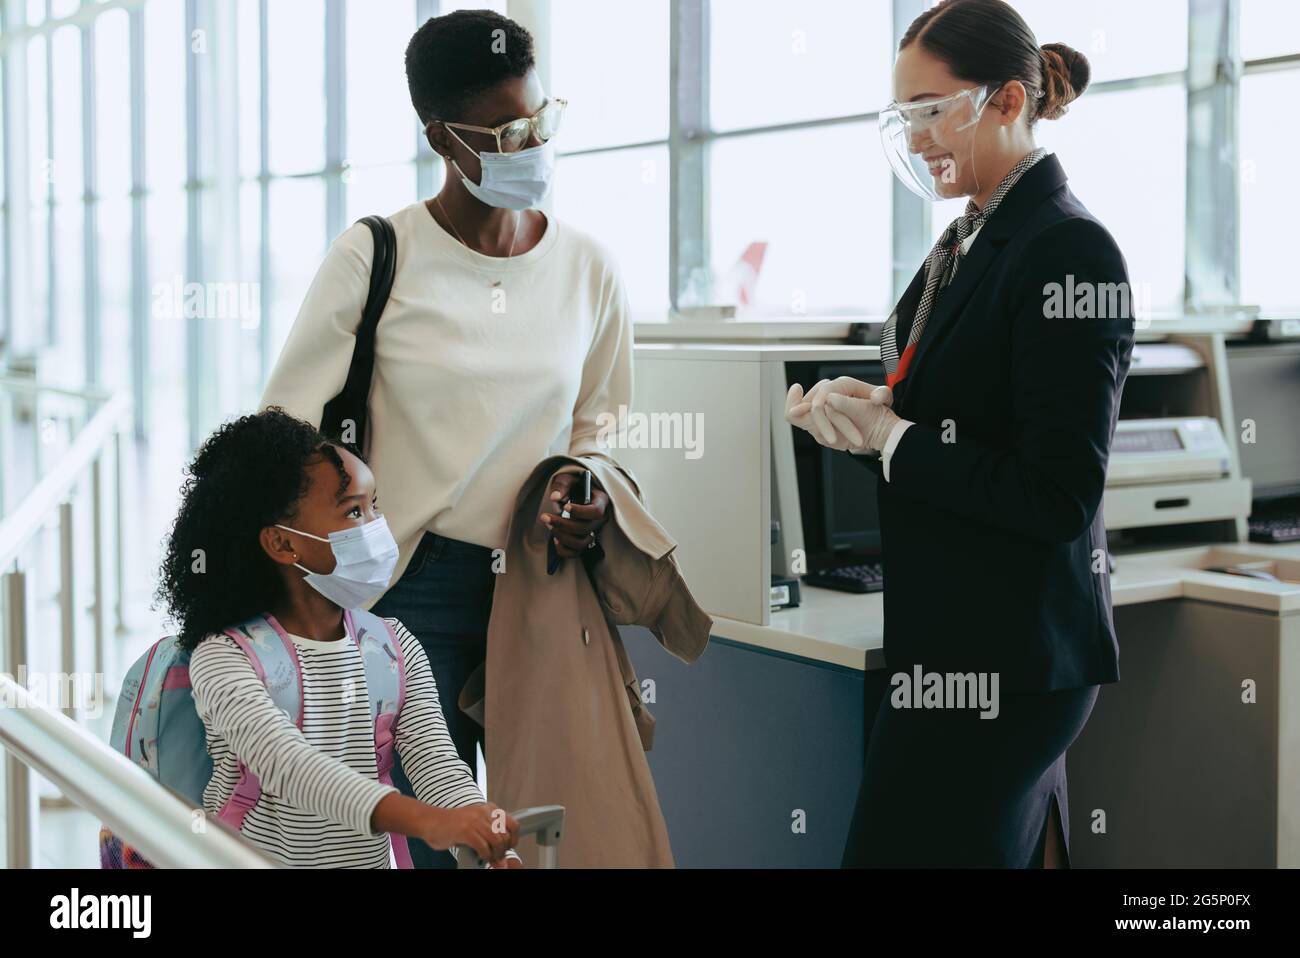 Mother and daughter with face masks passing by airport check-in counter with airport staff wearing face shield. Family of two traveling during pandemi Stock Photo